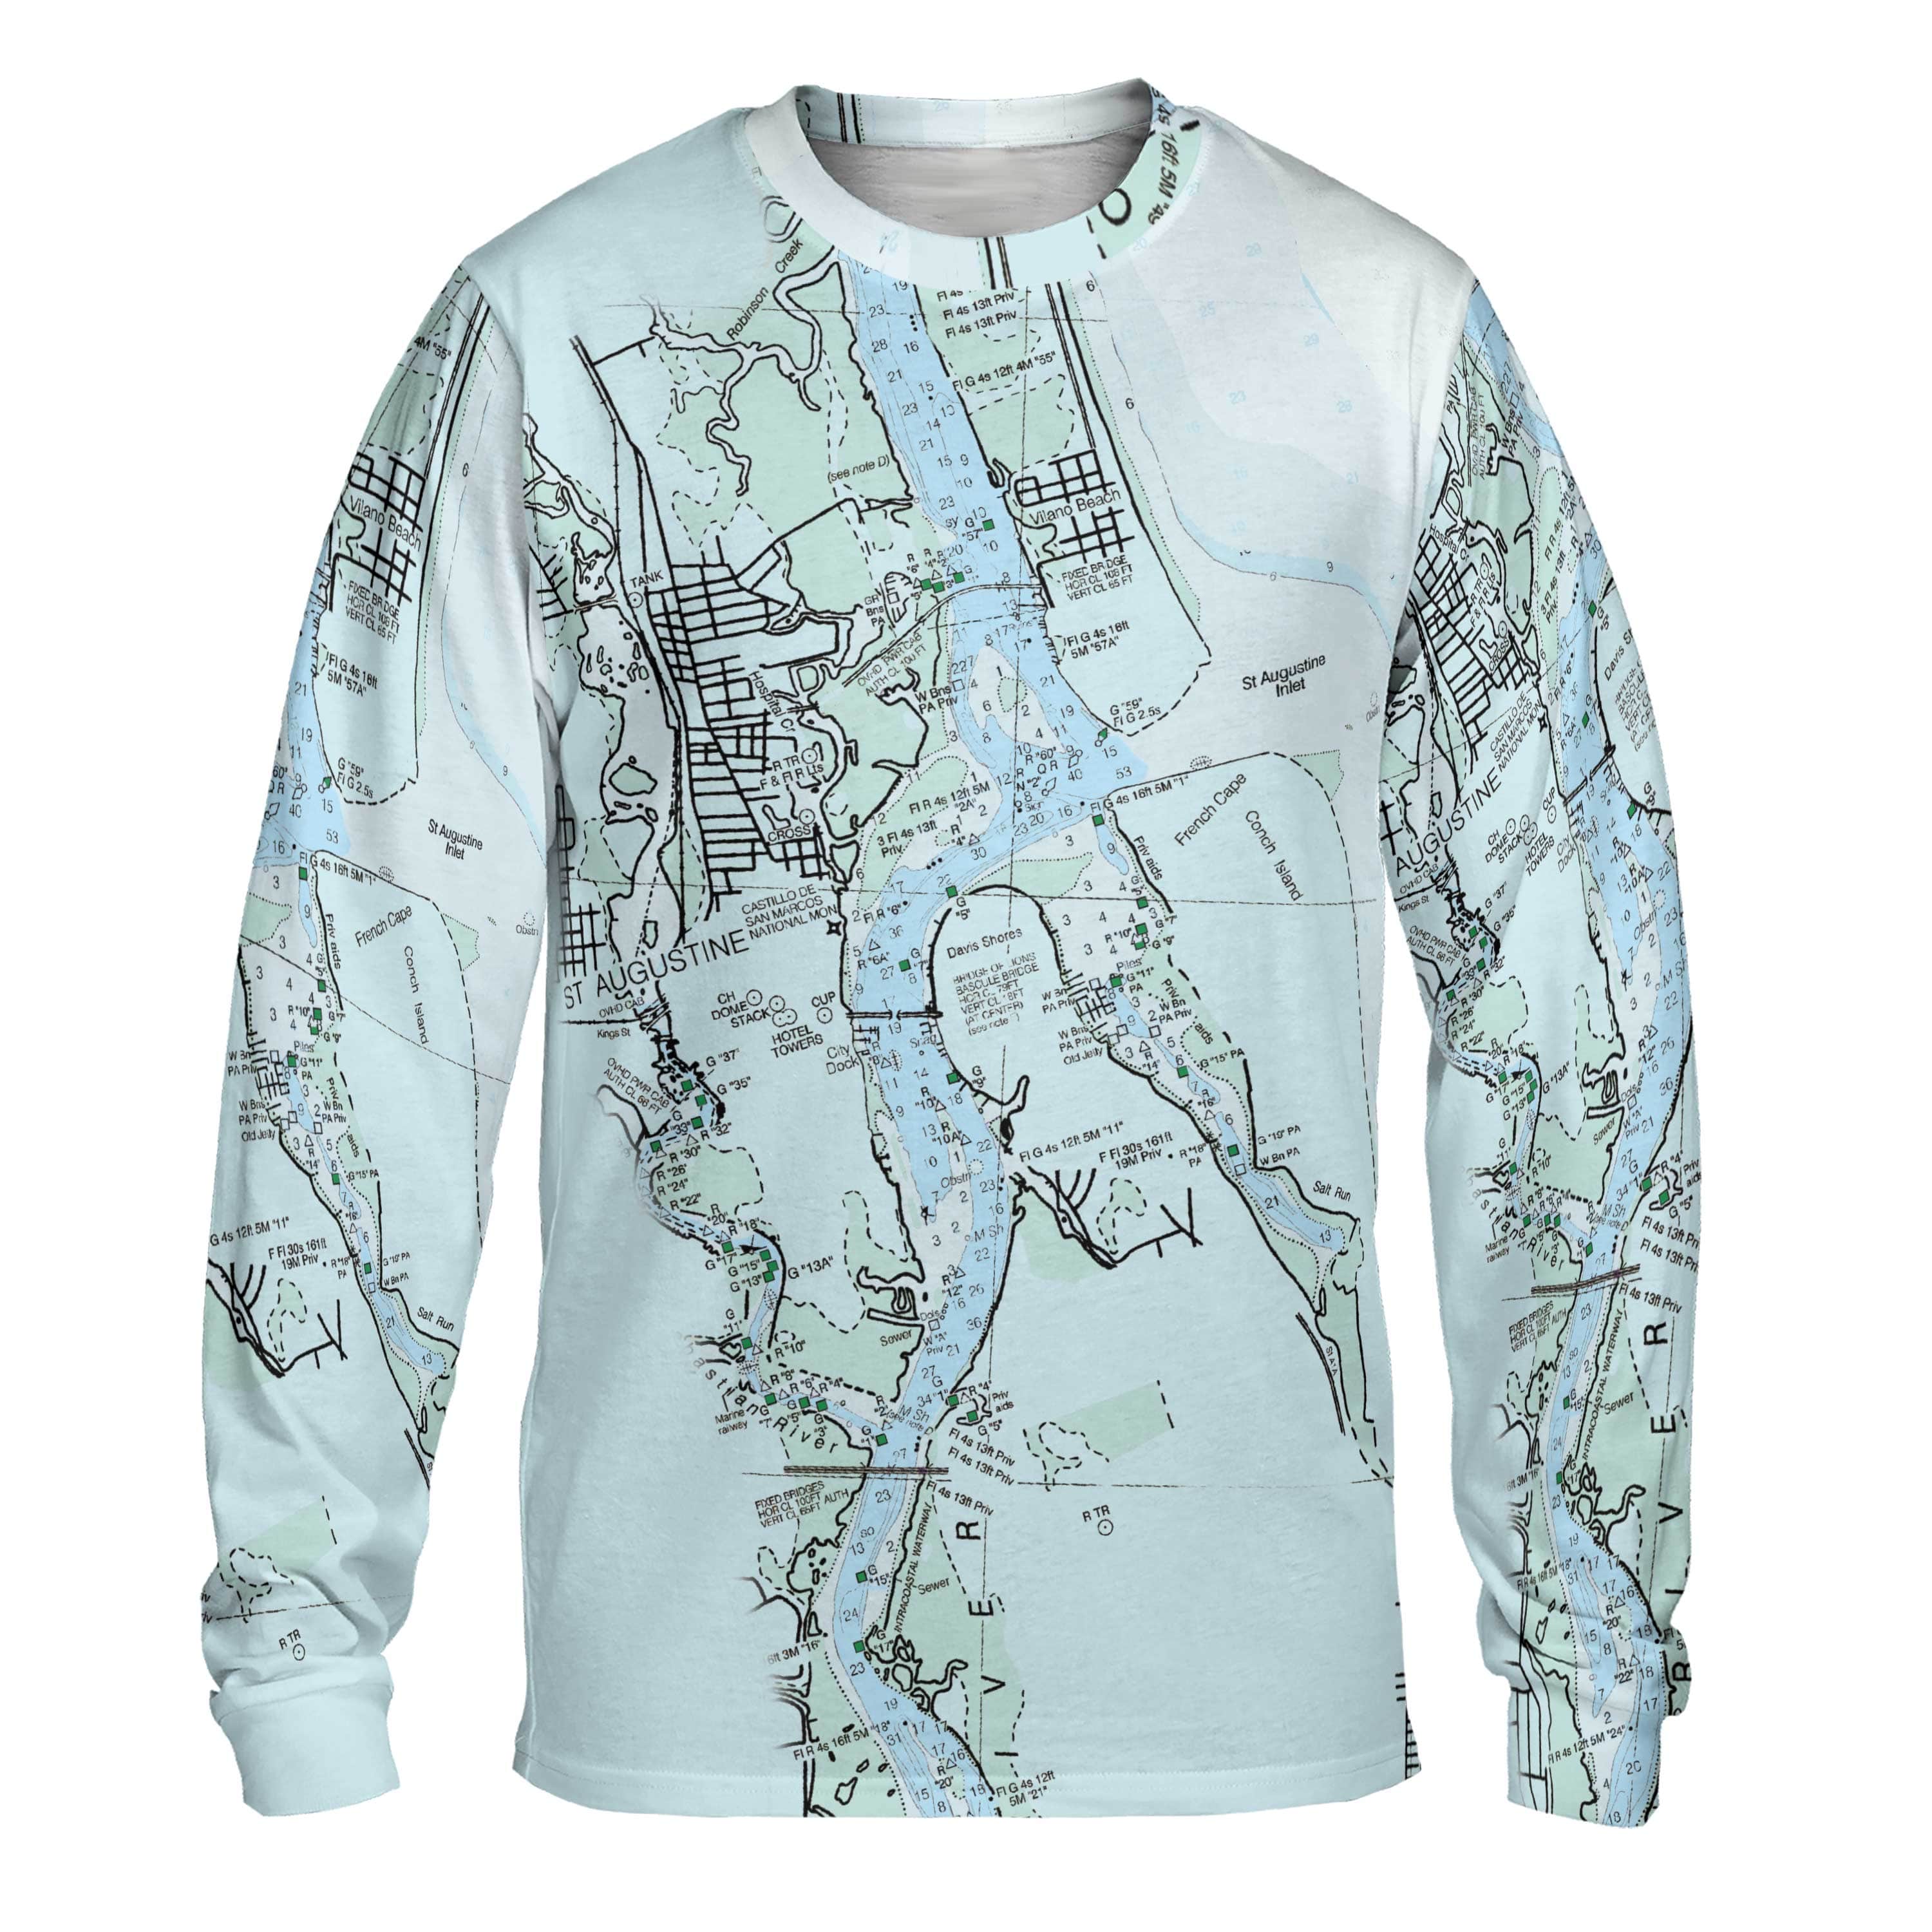 The Emerald St. Augustine Long Sleeve Tee